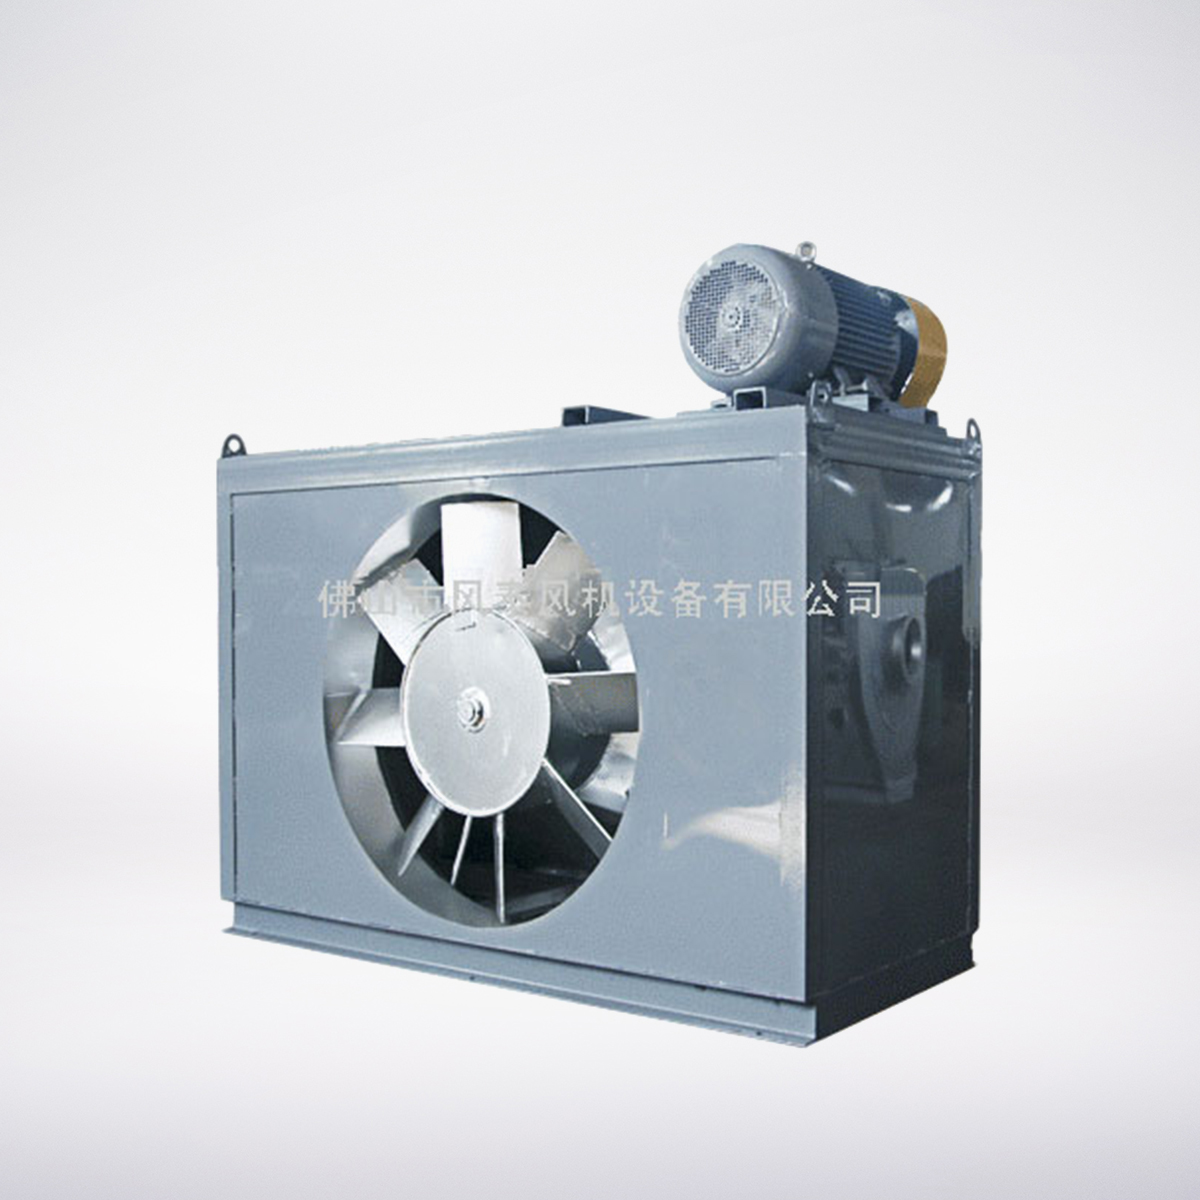 Forward and reverse fan for aging furnace